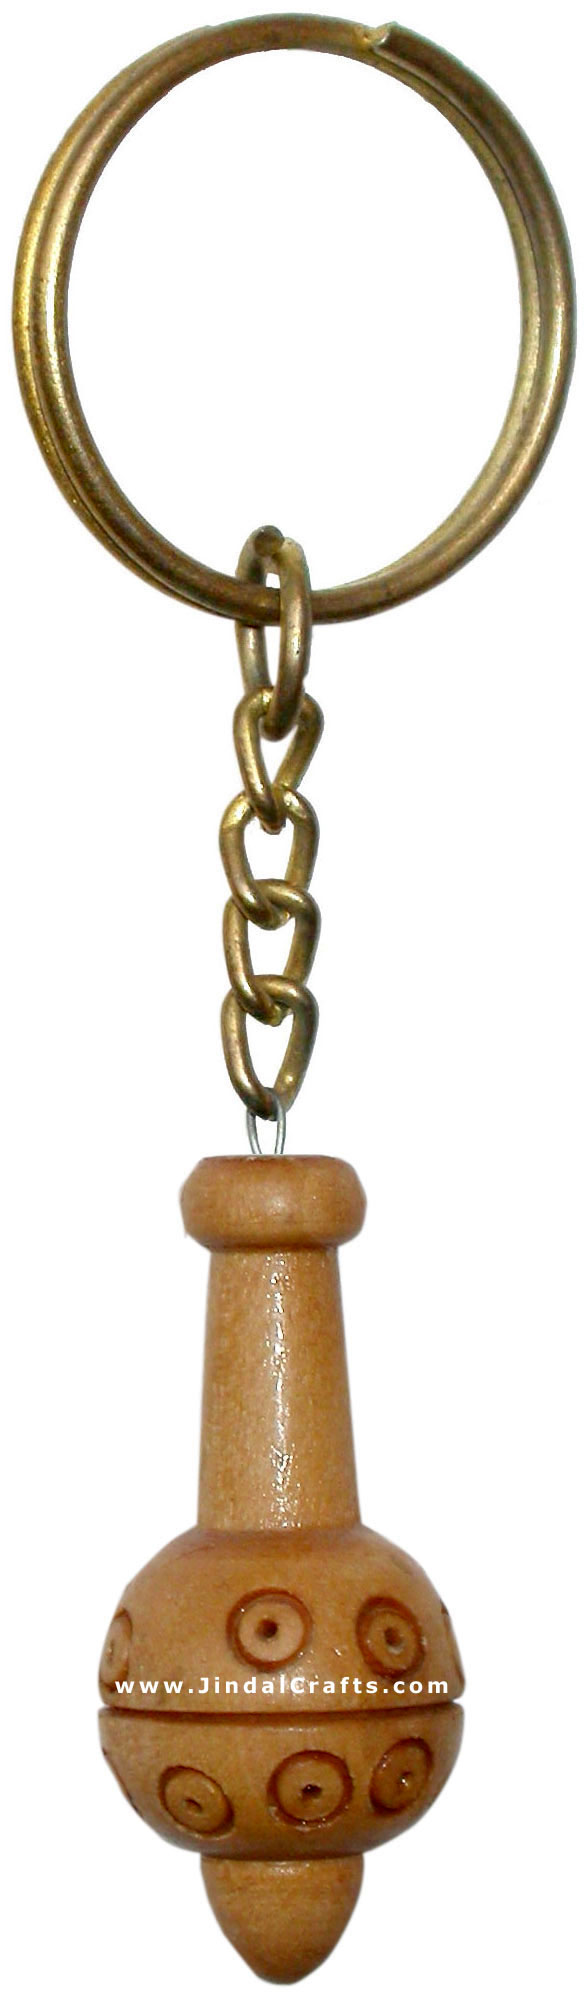 Handcarved Wooden Key Chain Key Ring Indian Trible Art